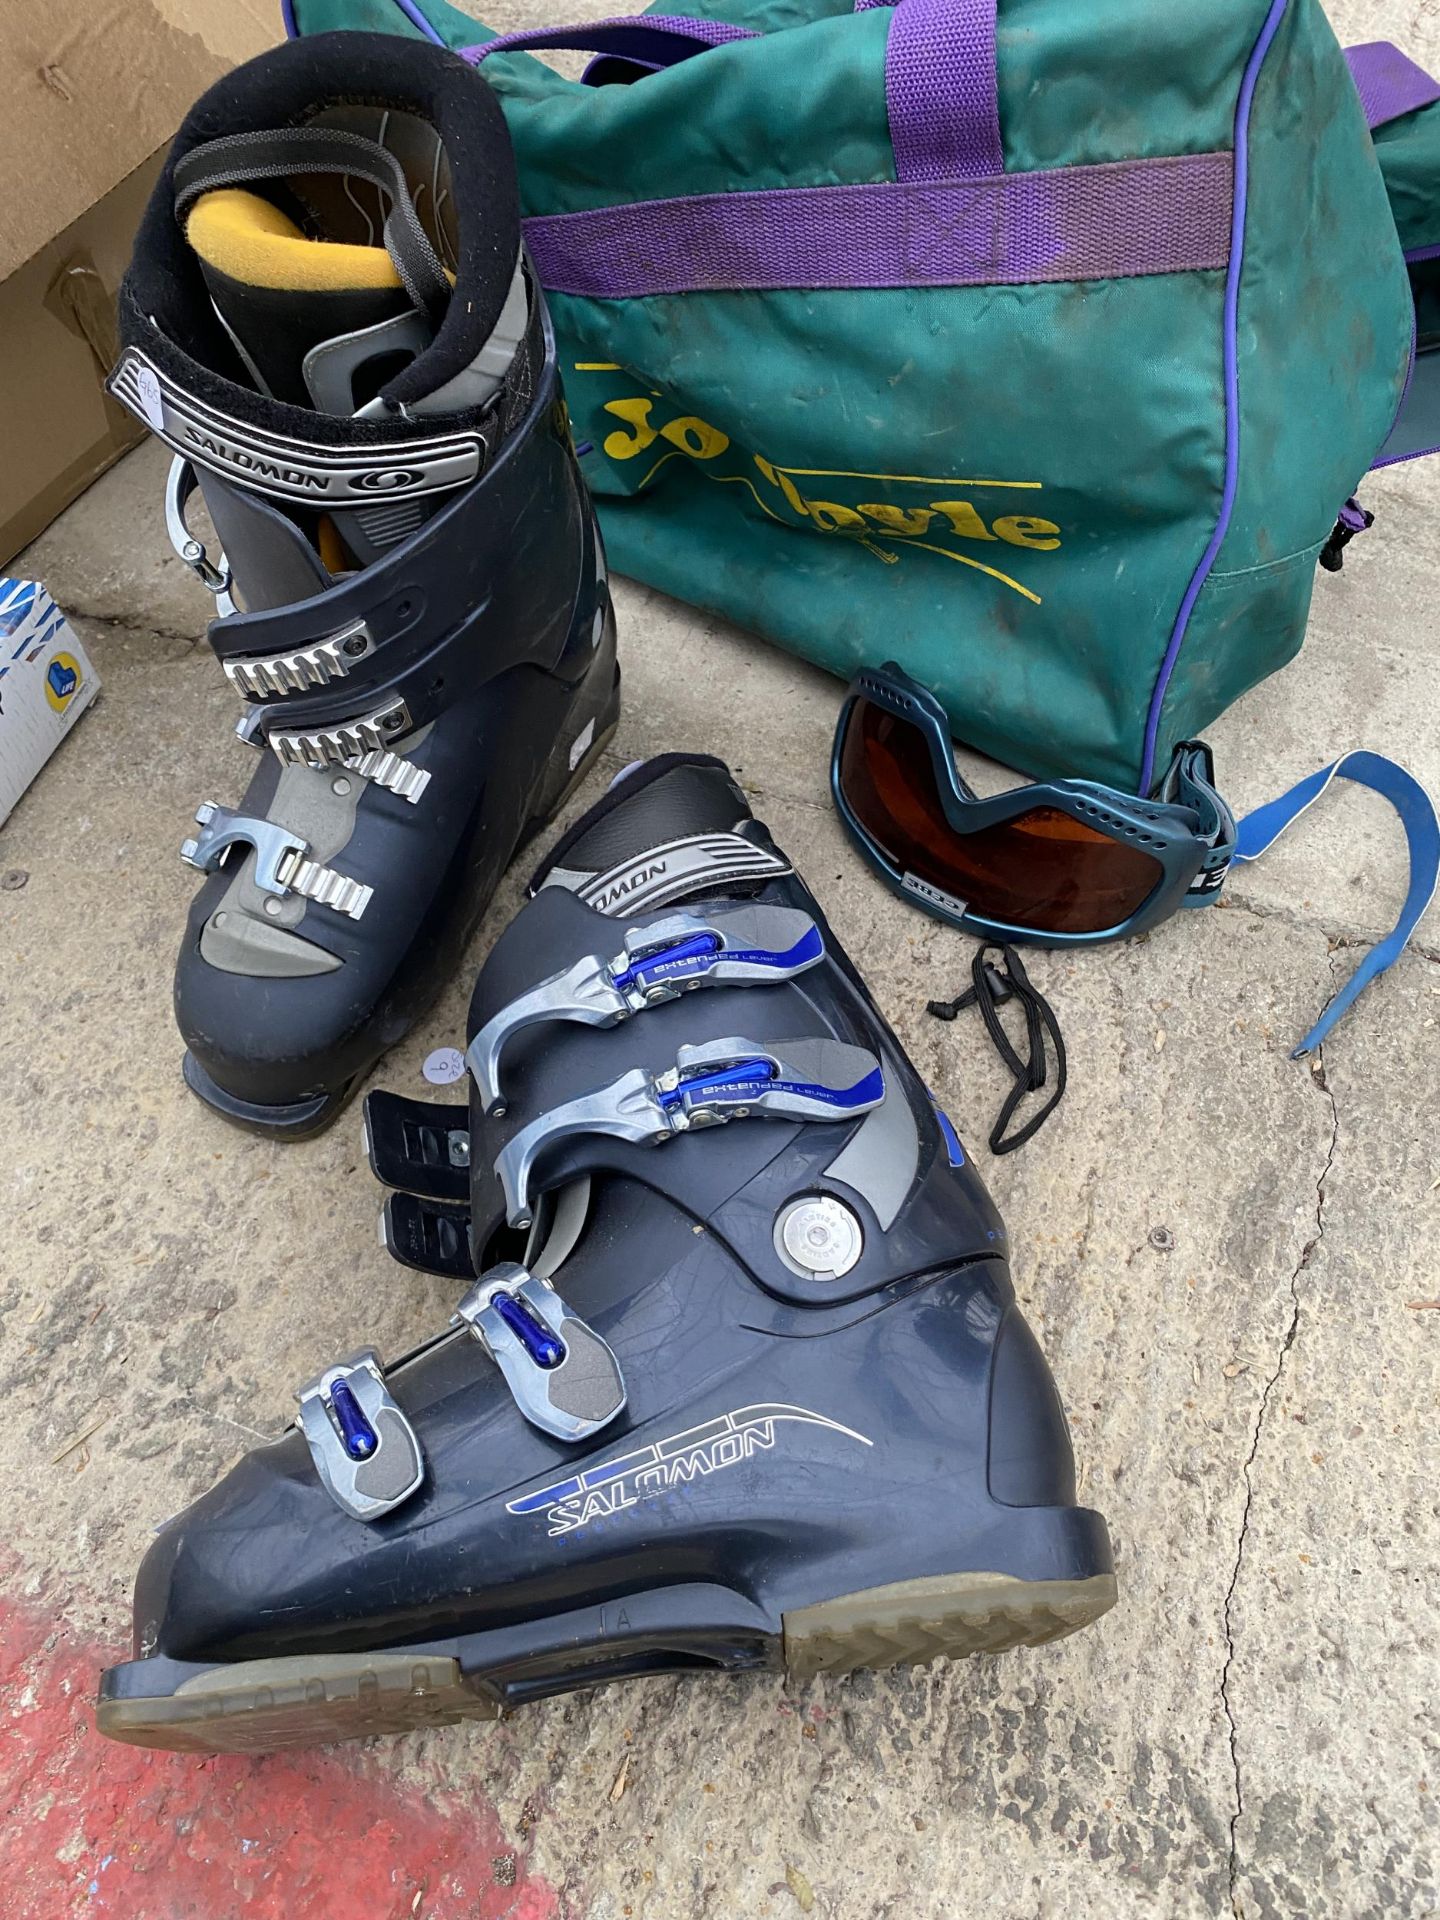 A PAIR OF SKI BOOTS AND A CARRY BAG - Image 3 of 4